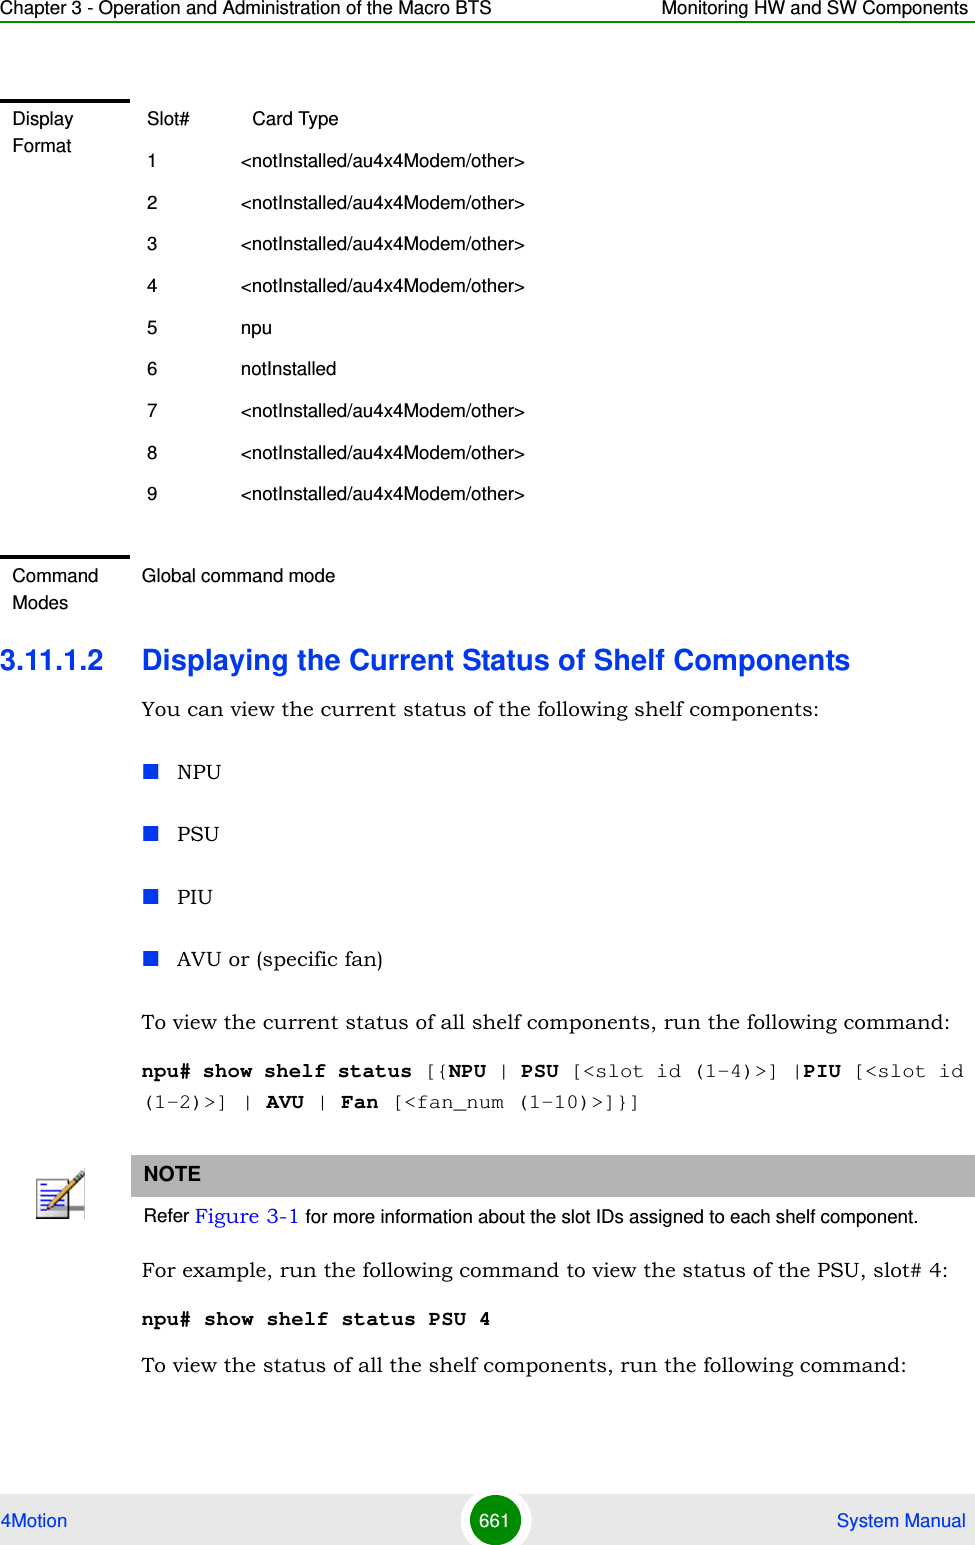 Chapter 3 - Operation and Administration of the Macro BTS Monitoring HW and SW Components4Motion 661  System Manual3.11.1.2 Displaying the Current Status of Shelf ComponentsYou can view the current status of the following shelf components:NPUPSUPIUAVU or (specific fan)To view the current status of all shelf components, run the following command:npu# show shelf status [{NPU | PSU [&lt;slot id (1-4)&gt;] |PIU [&lt;slot id (1-2)&gt;] | AVU | Fan [&lt;fan_num (1-10)&gt;]}]For example, run the following command to view the status of the PSU, slot# 4:npu# show shelf status PSU 4To view the status of all the shelf components, run the following command:Display Format Slot#            Card Type 1                &lt;notInstalled/au4x4Modem/other&gt; 2                &lt;notInstalled/au4x4Modem/other&gt; 3                &lt;notInstalled/au4x4Modem/other&gt; 4                &lt;notInstalled/au4x4Modem/other&gt; 5                npu 6                notInstalled 7                &lt;notInstalled/au4x4Modem/other&gt; 8                &lt;notInstalled/au4x4Modem/other&gt; 9                &lt;notInstalled/au4x4Modem/other&gt;Command ModesGlobal command modeNOTERefer Figure 3-1 for more information about the slot IDs assigned to each shelf component.